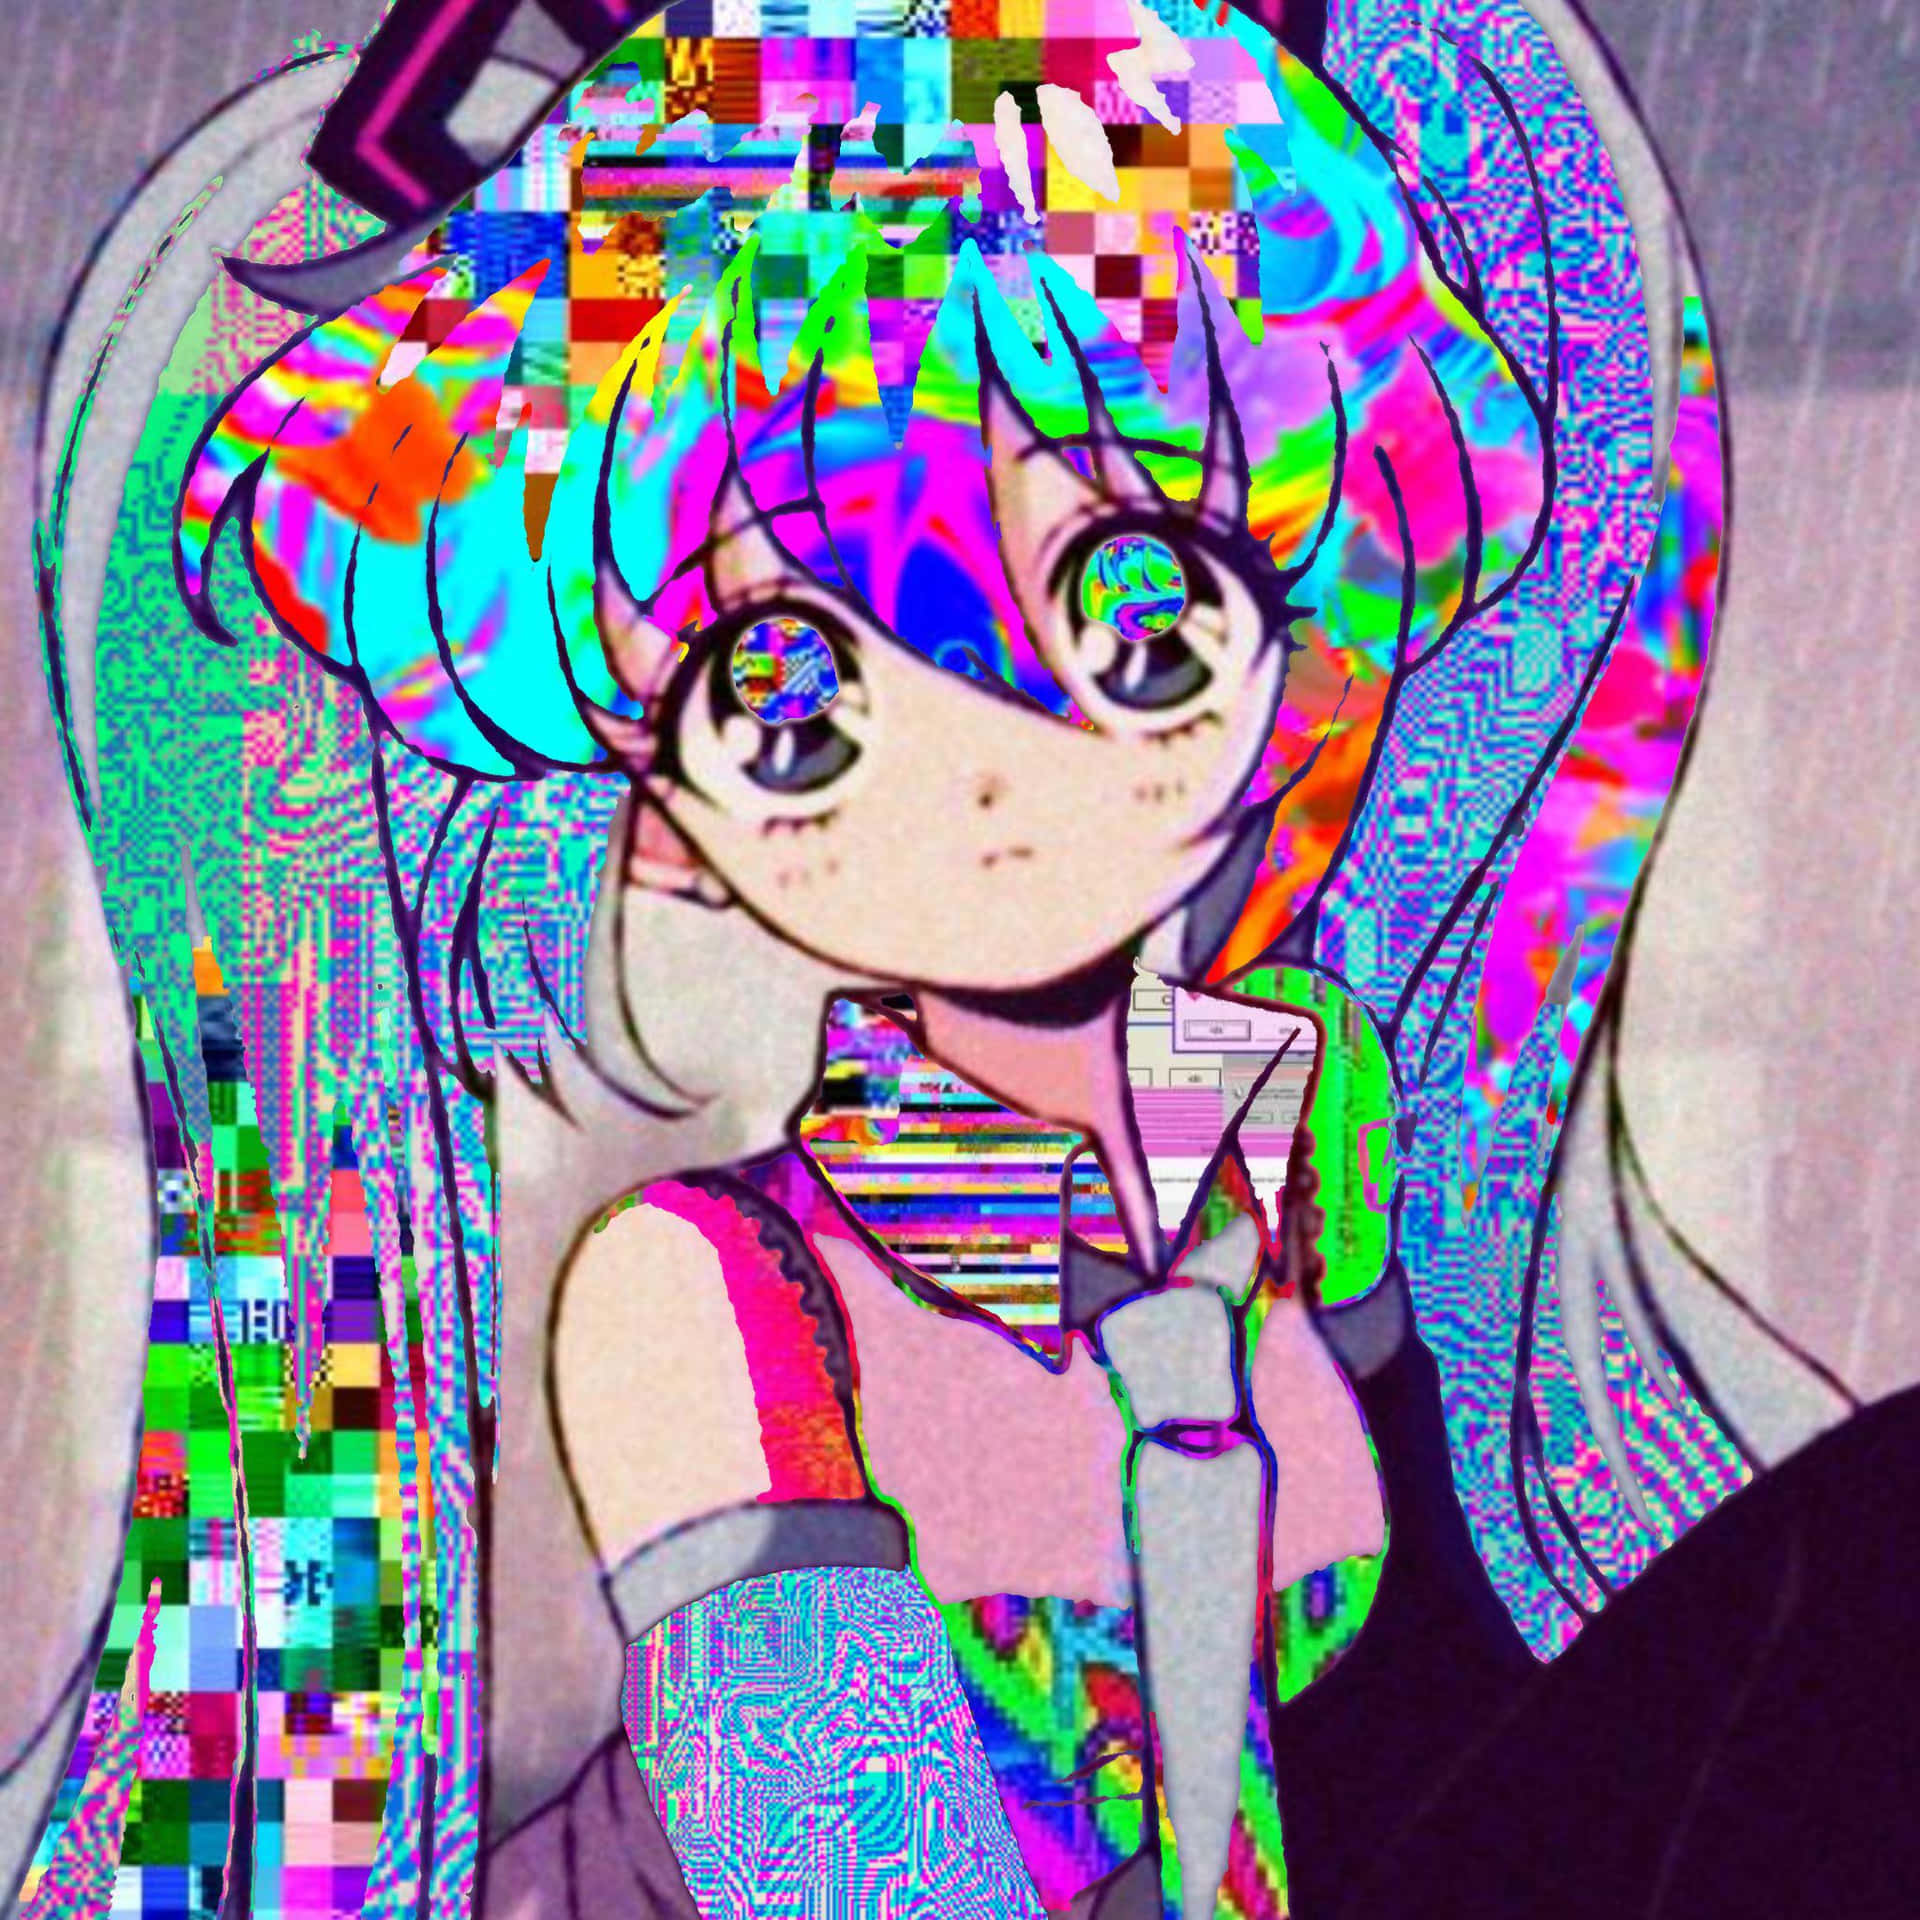 Enter the Digital Abyss of Glitchcore